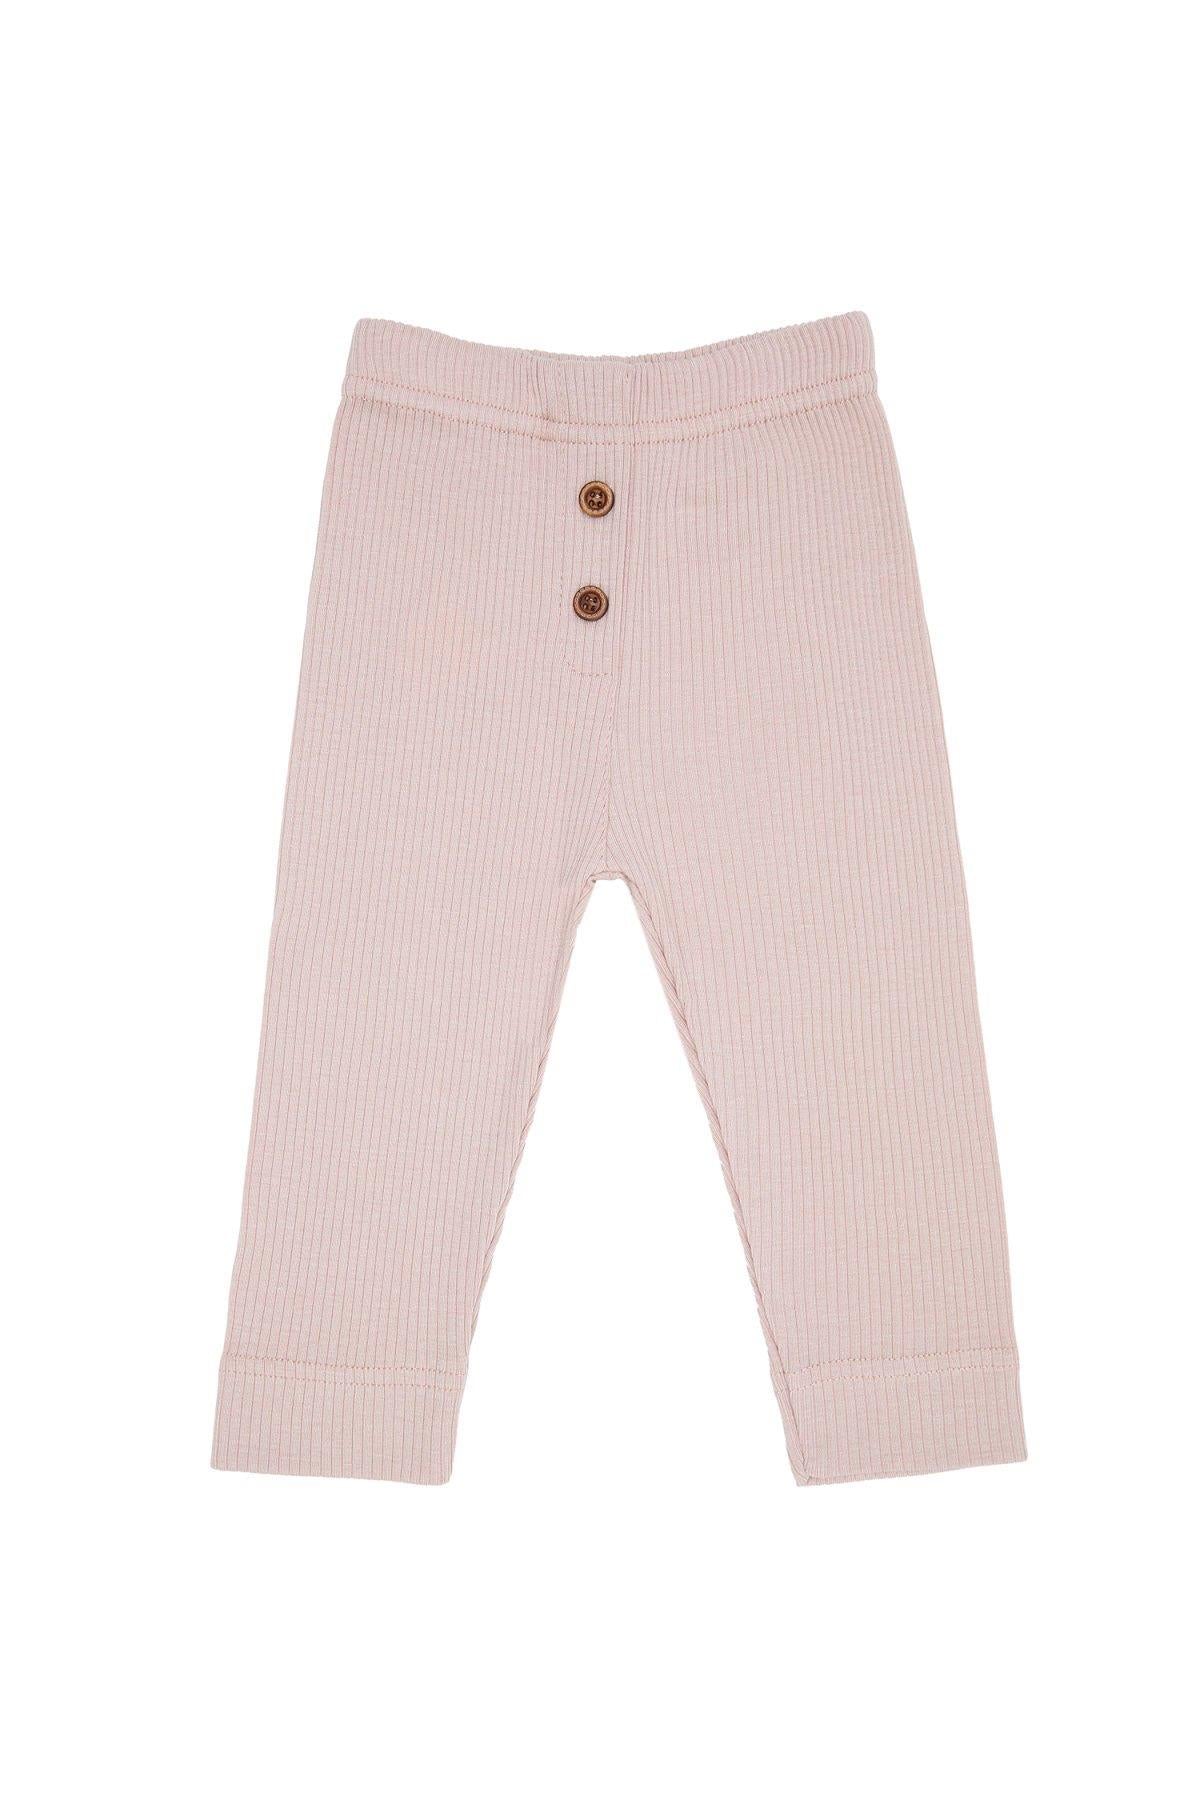  Baby and Children Trousers Leggings Pink